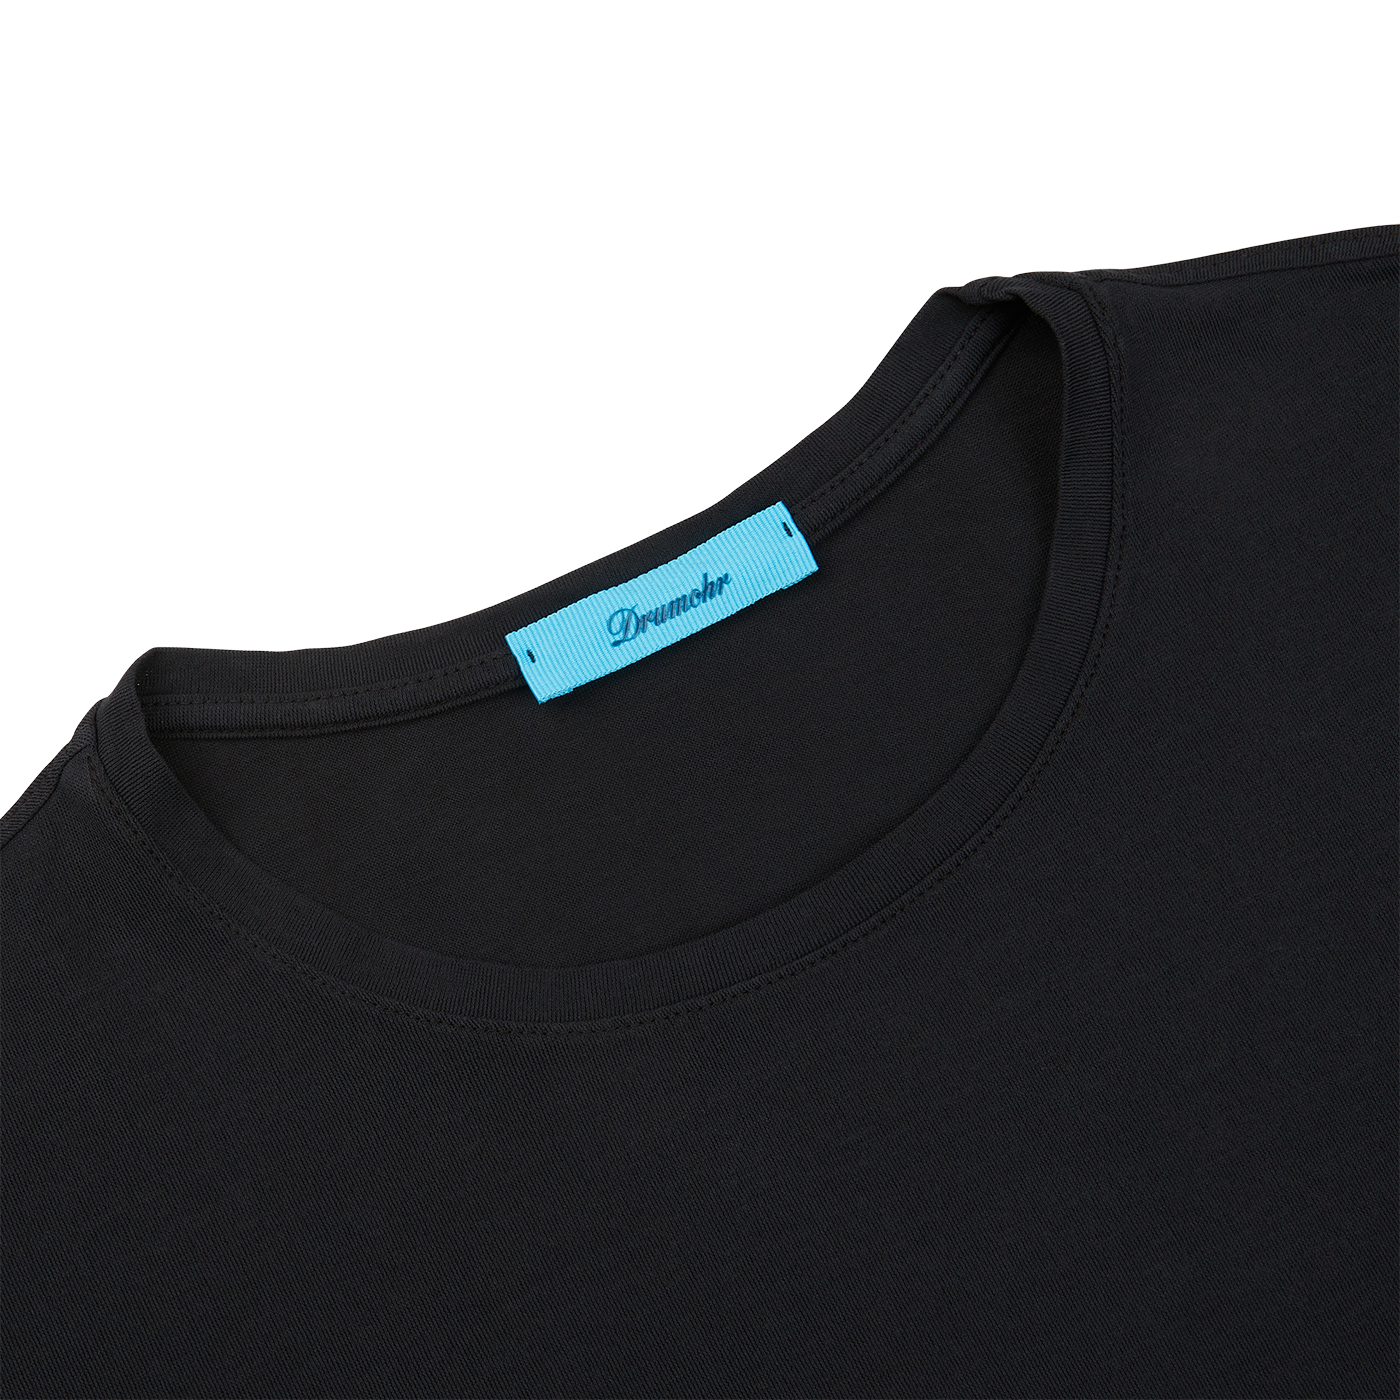 This Black Ice Cotton LS T-Shirt from Drumohr features a blue label on the back.